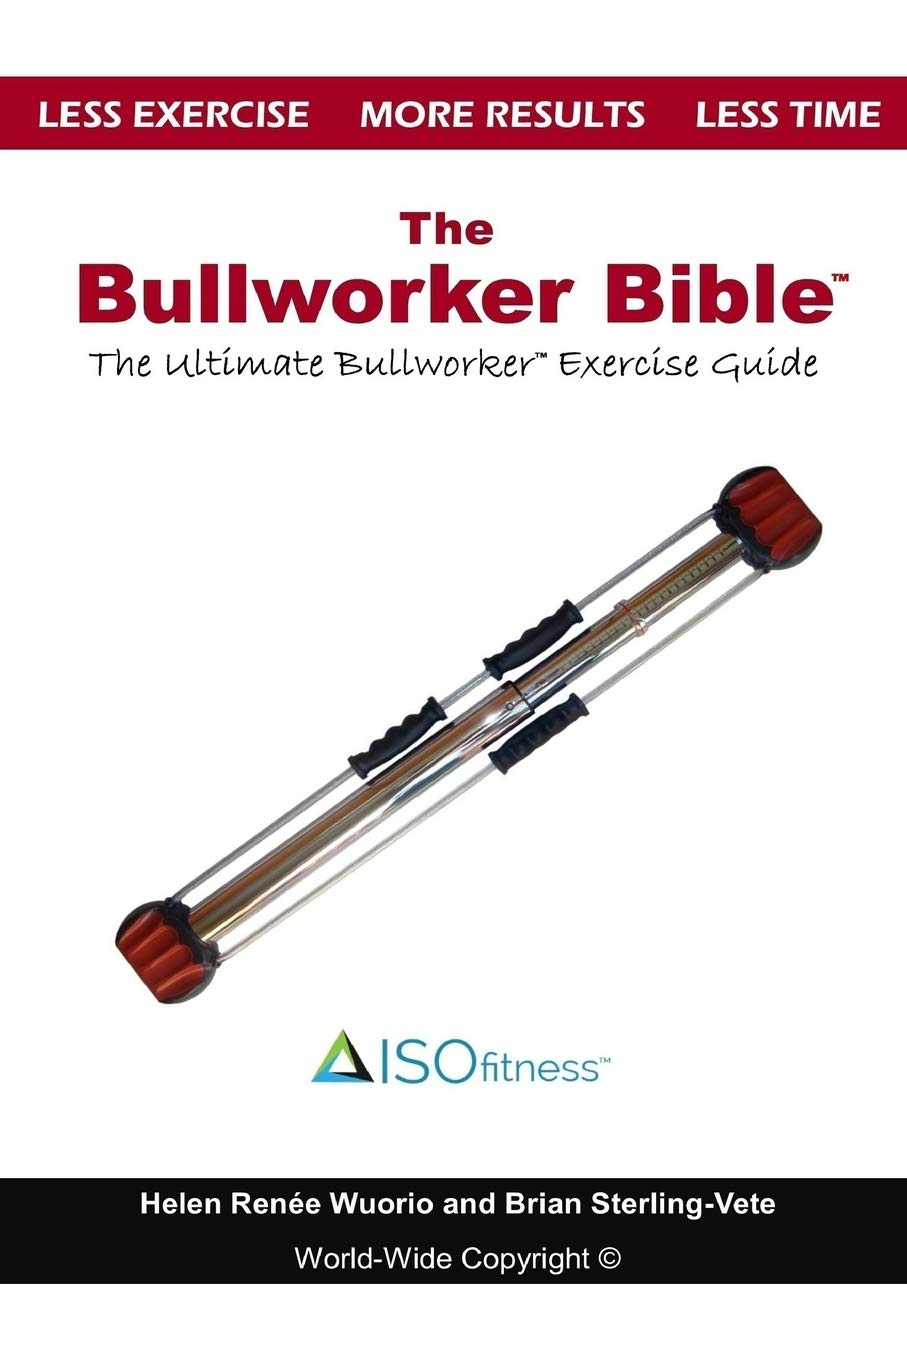 download free bullworker exercise chart